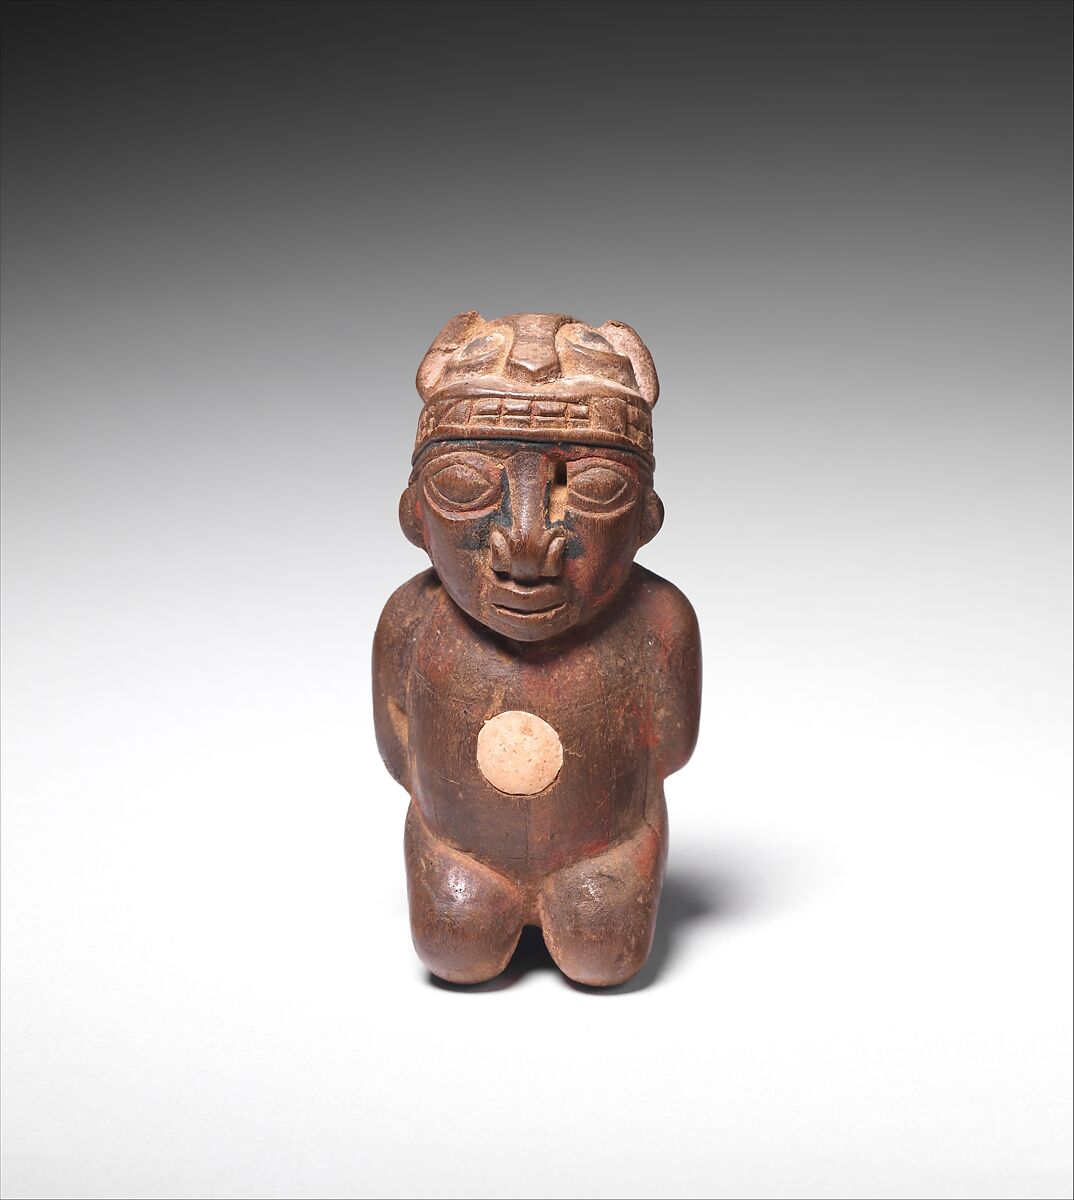 Lime container in the shape of a captive, Wari artist(s), Wood, bone inlay, paint, fiber, Wari 